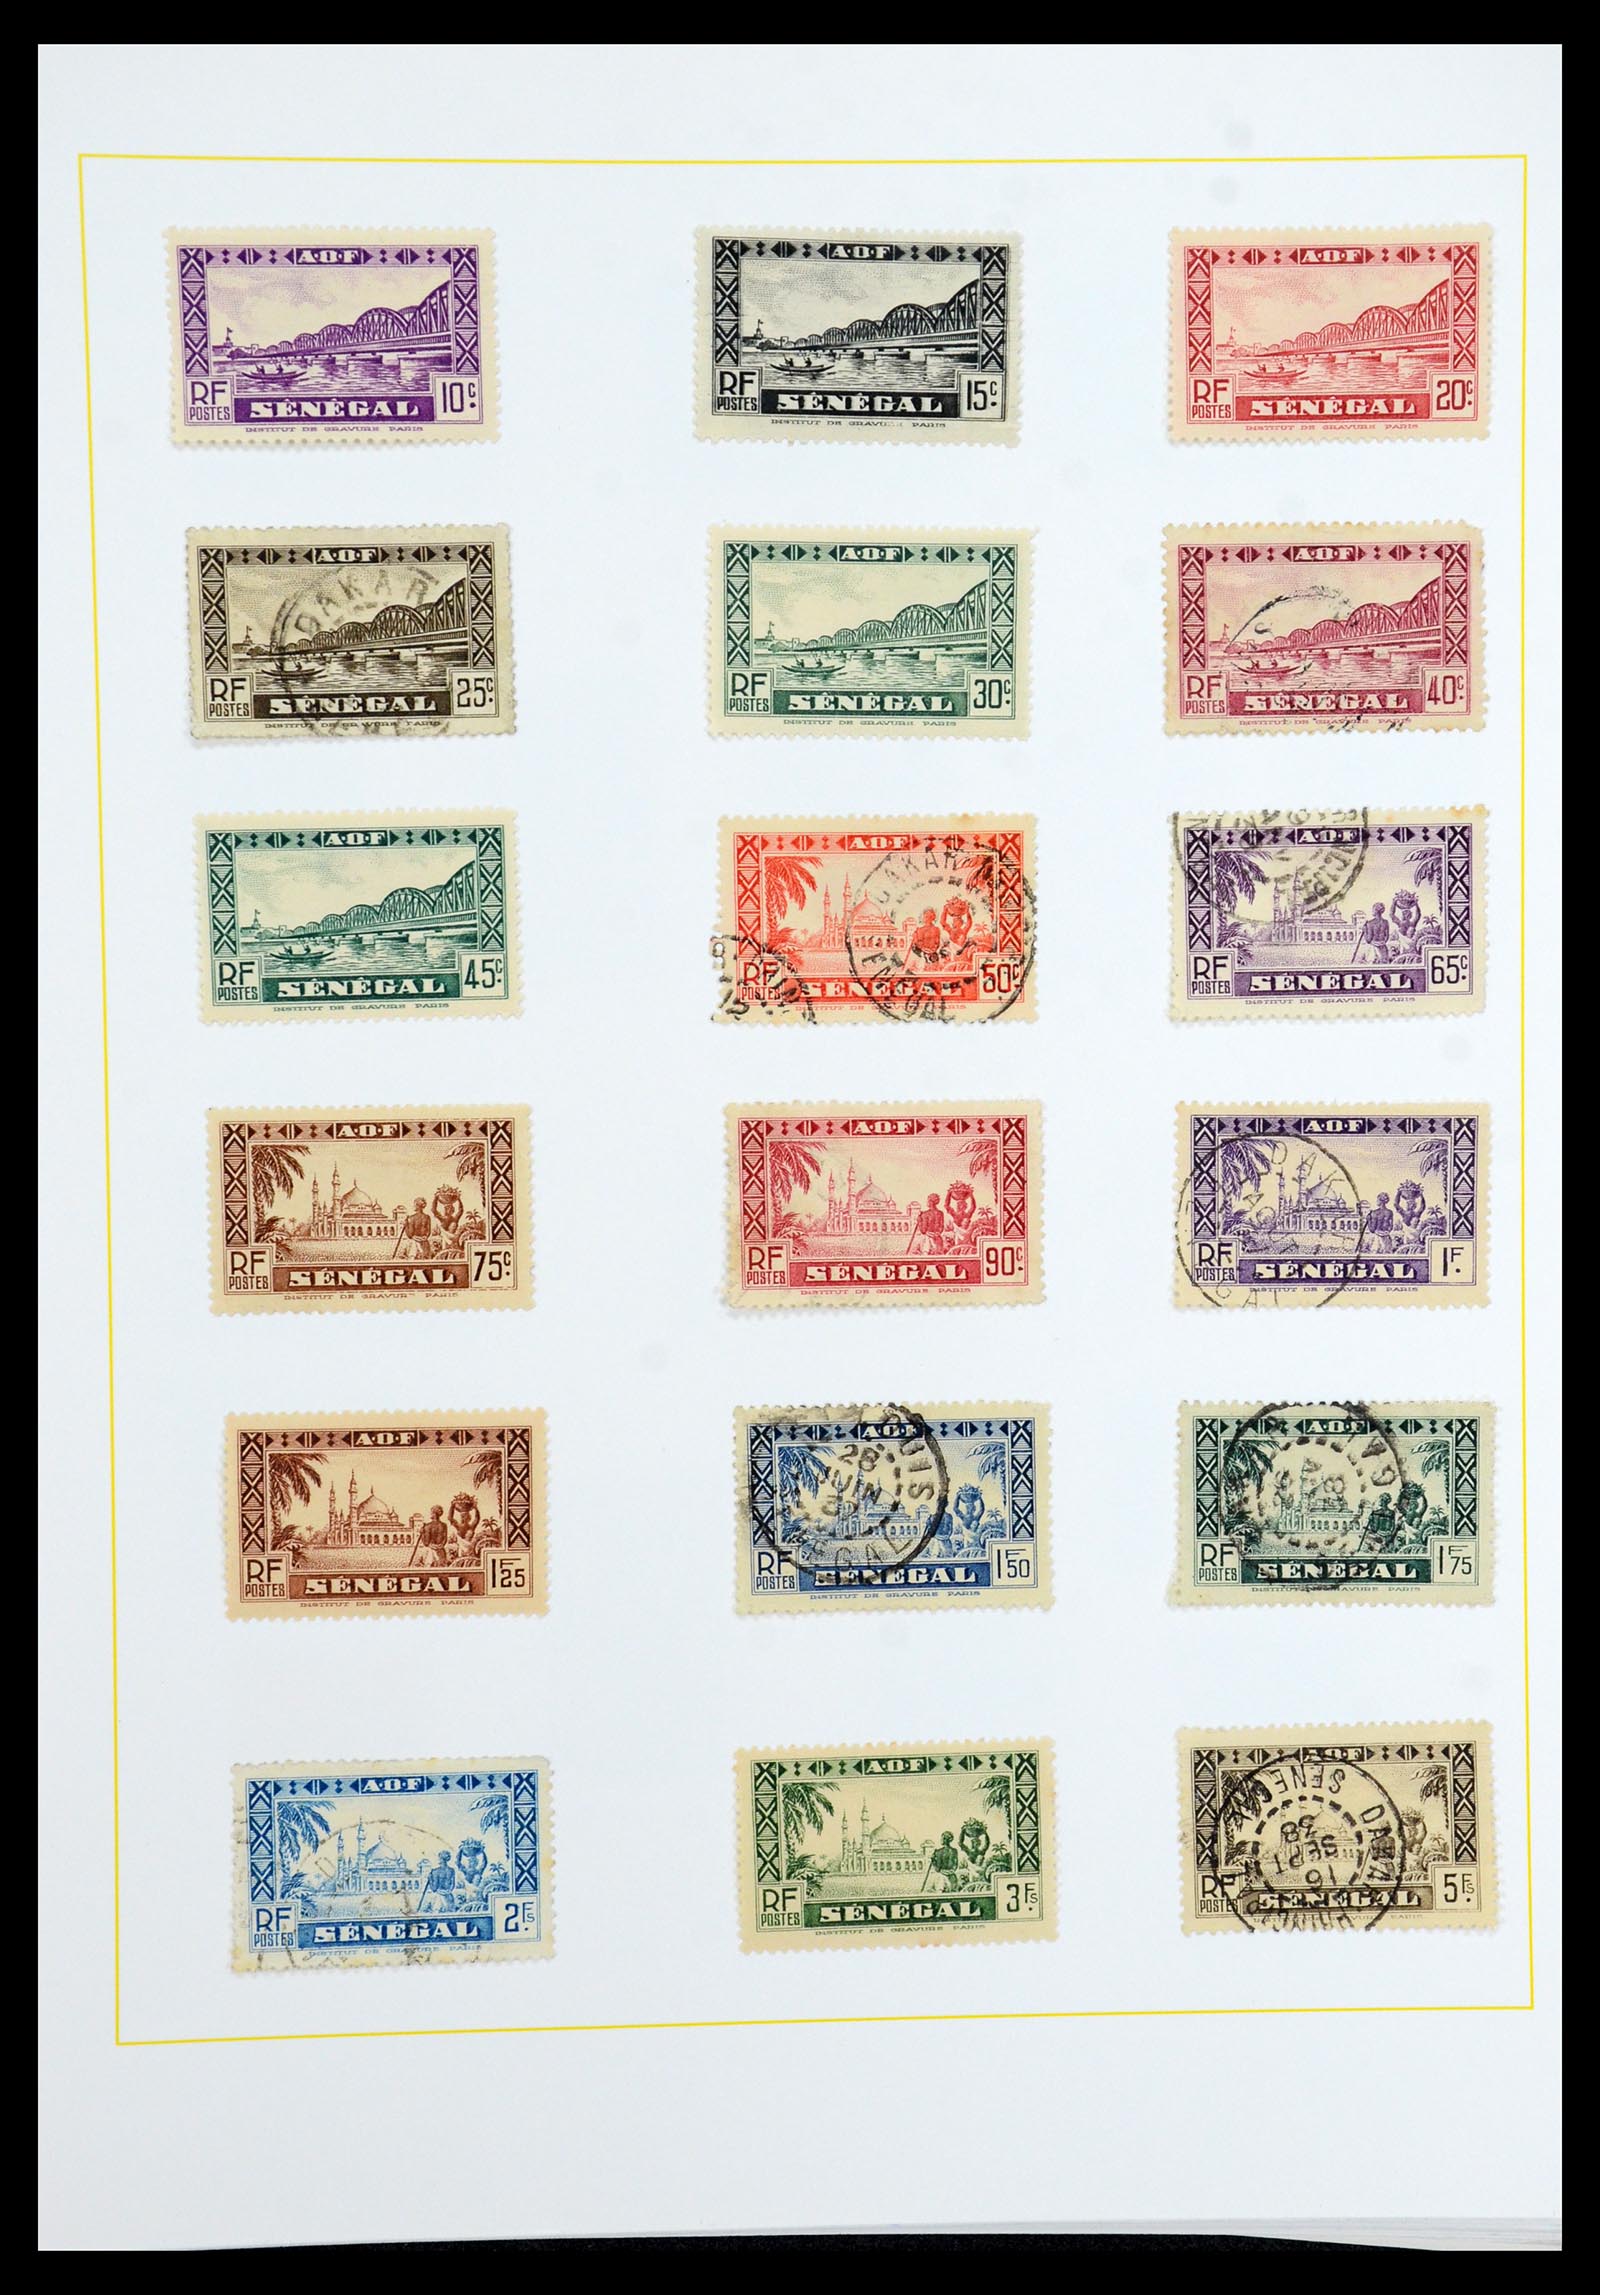 36099 252 - Stamp collection 36099 French coonies 1885-1950.